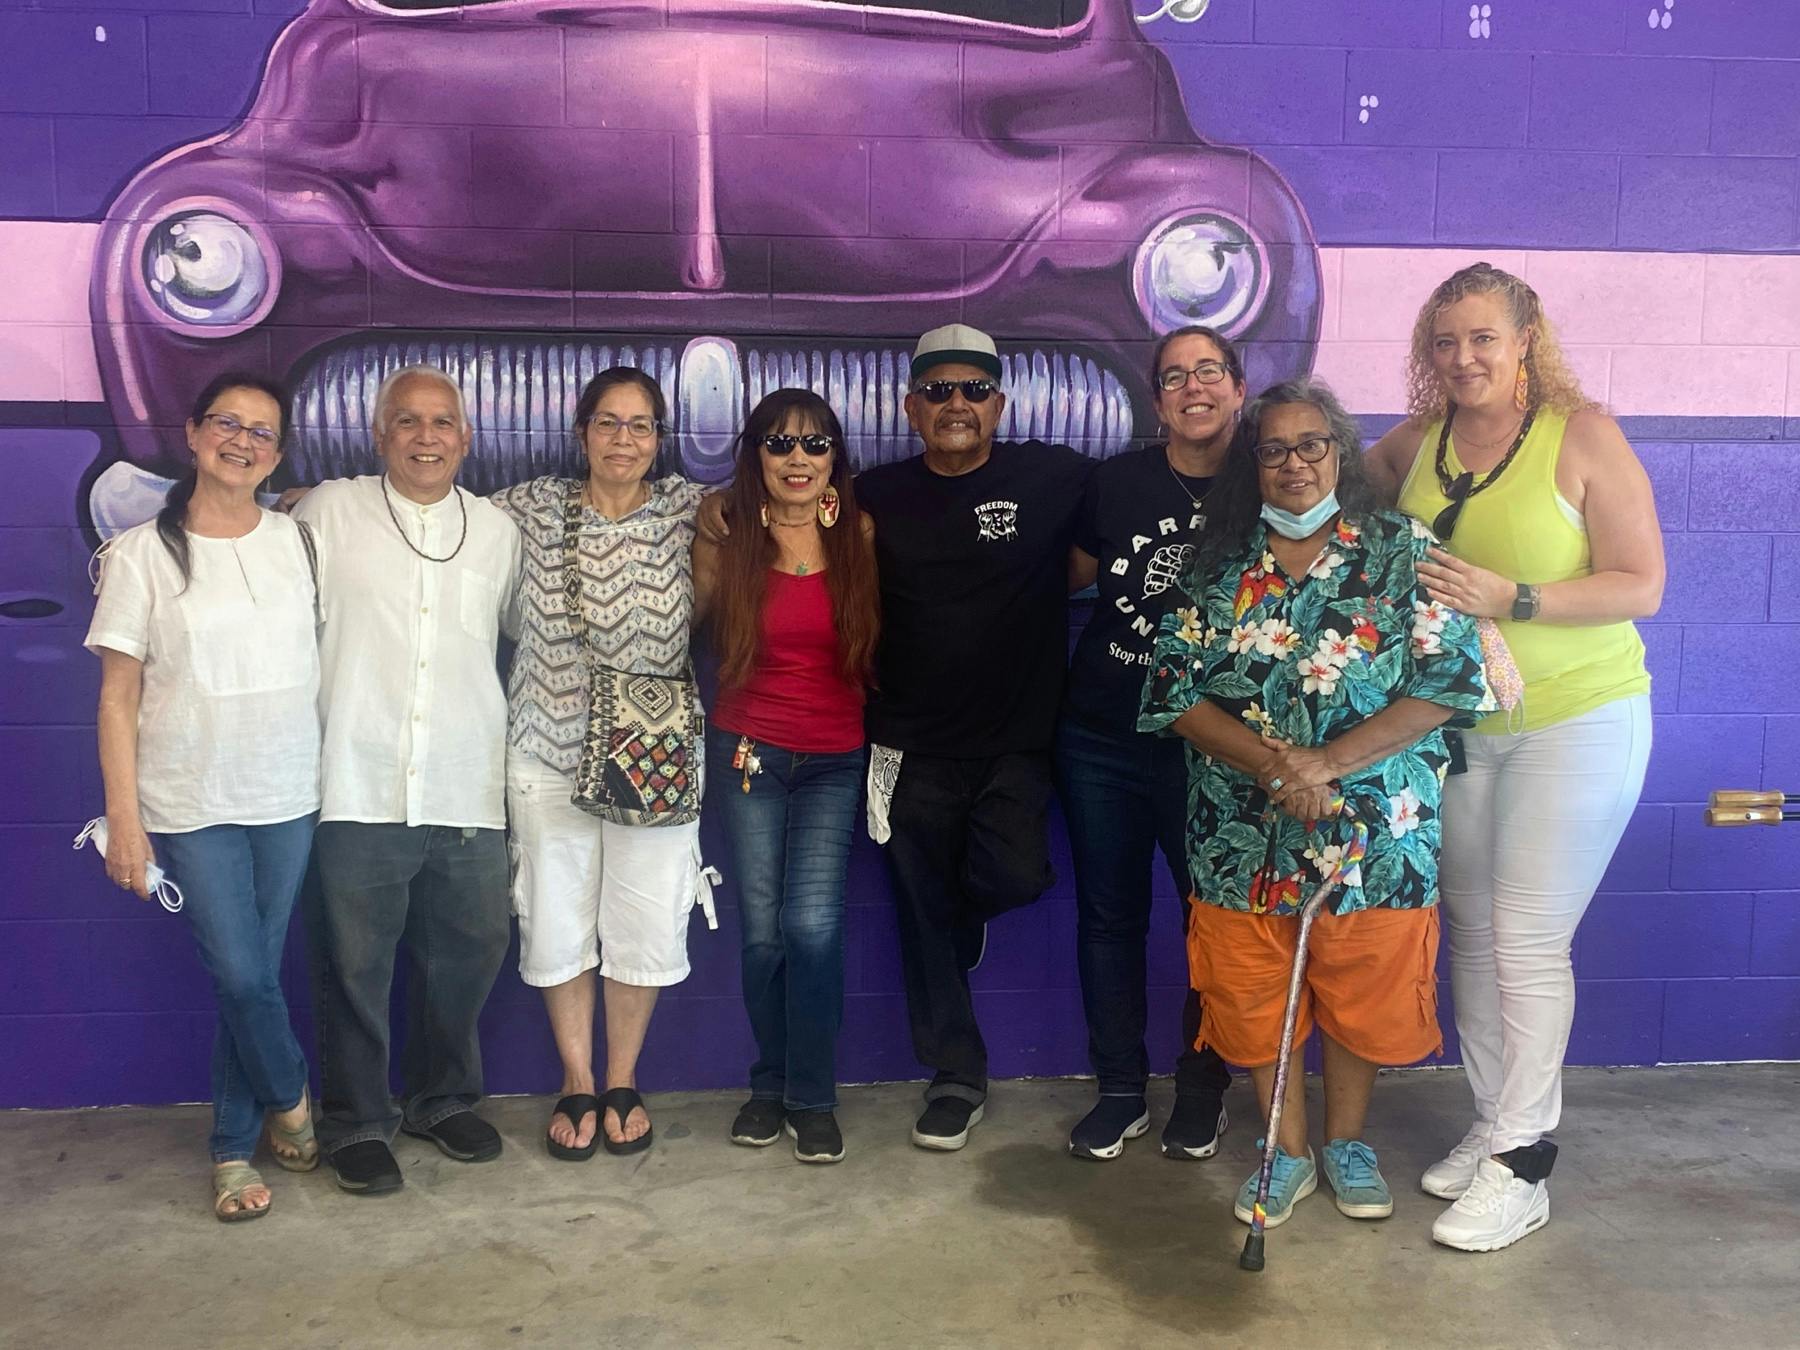 Members of Barrios Unidos stand together in front of mural